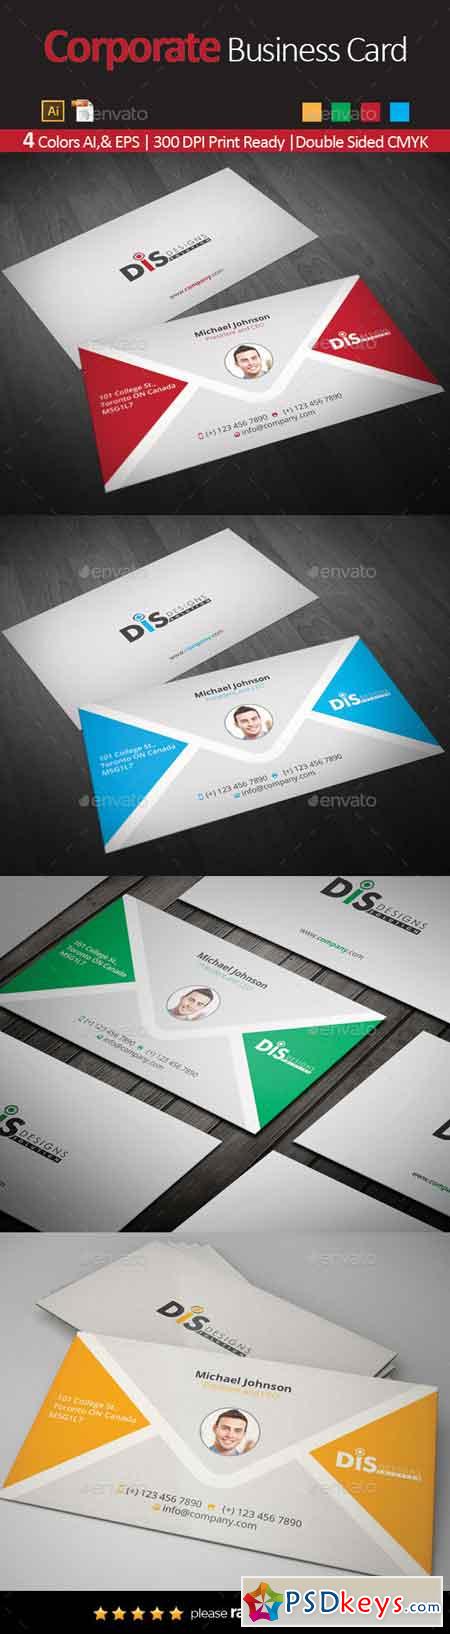 Business Card 10703858